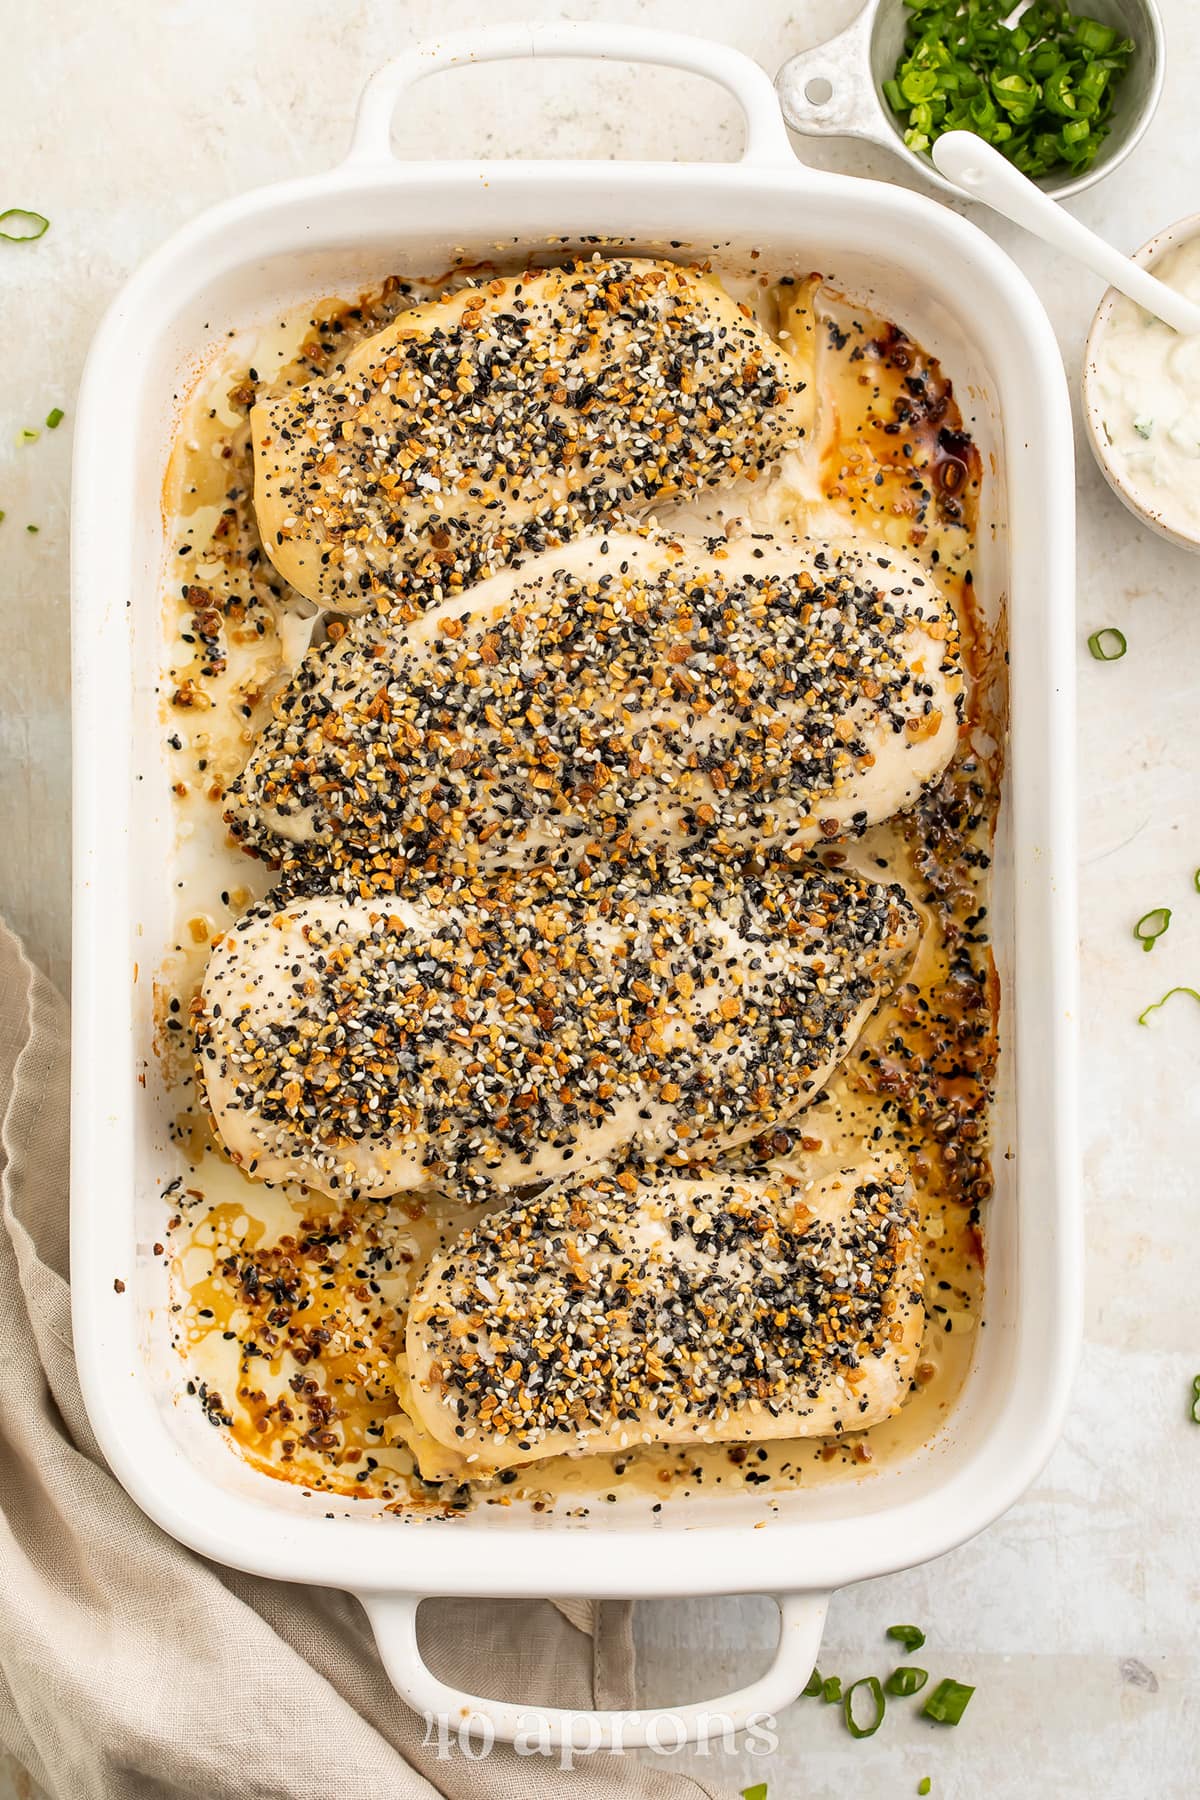 4 Whole30 Everything Bagel chicken breasts in a white rectangular casserole dish on a neutral table.